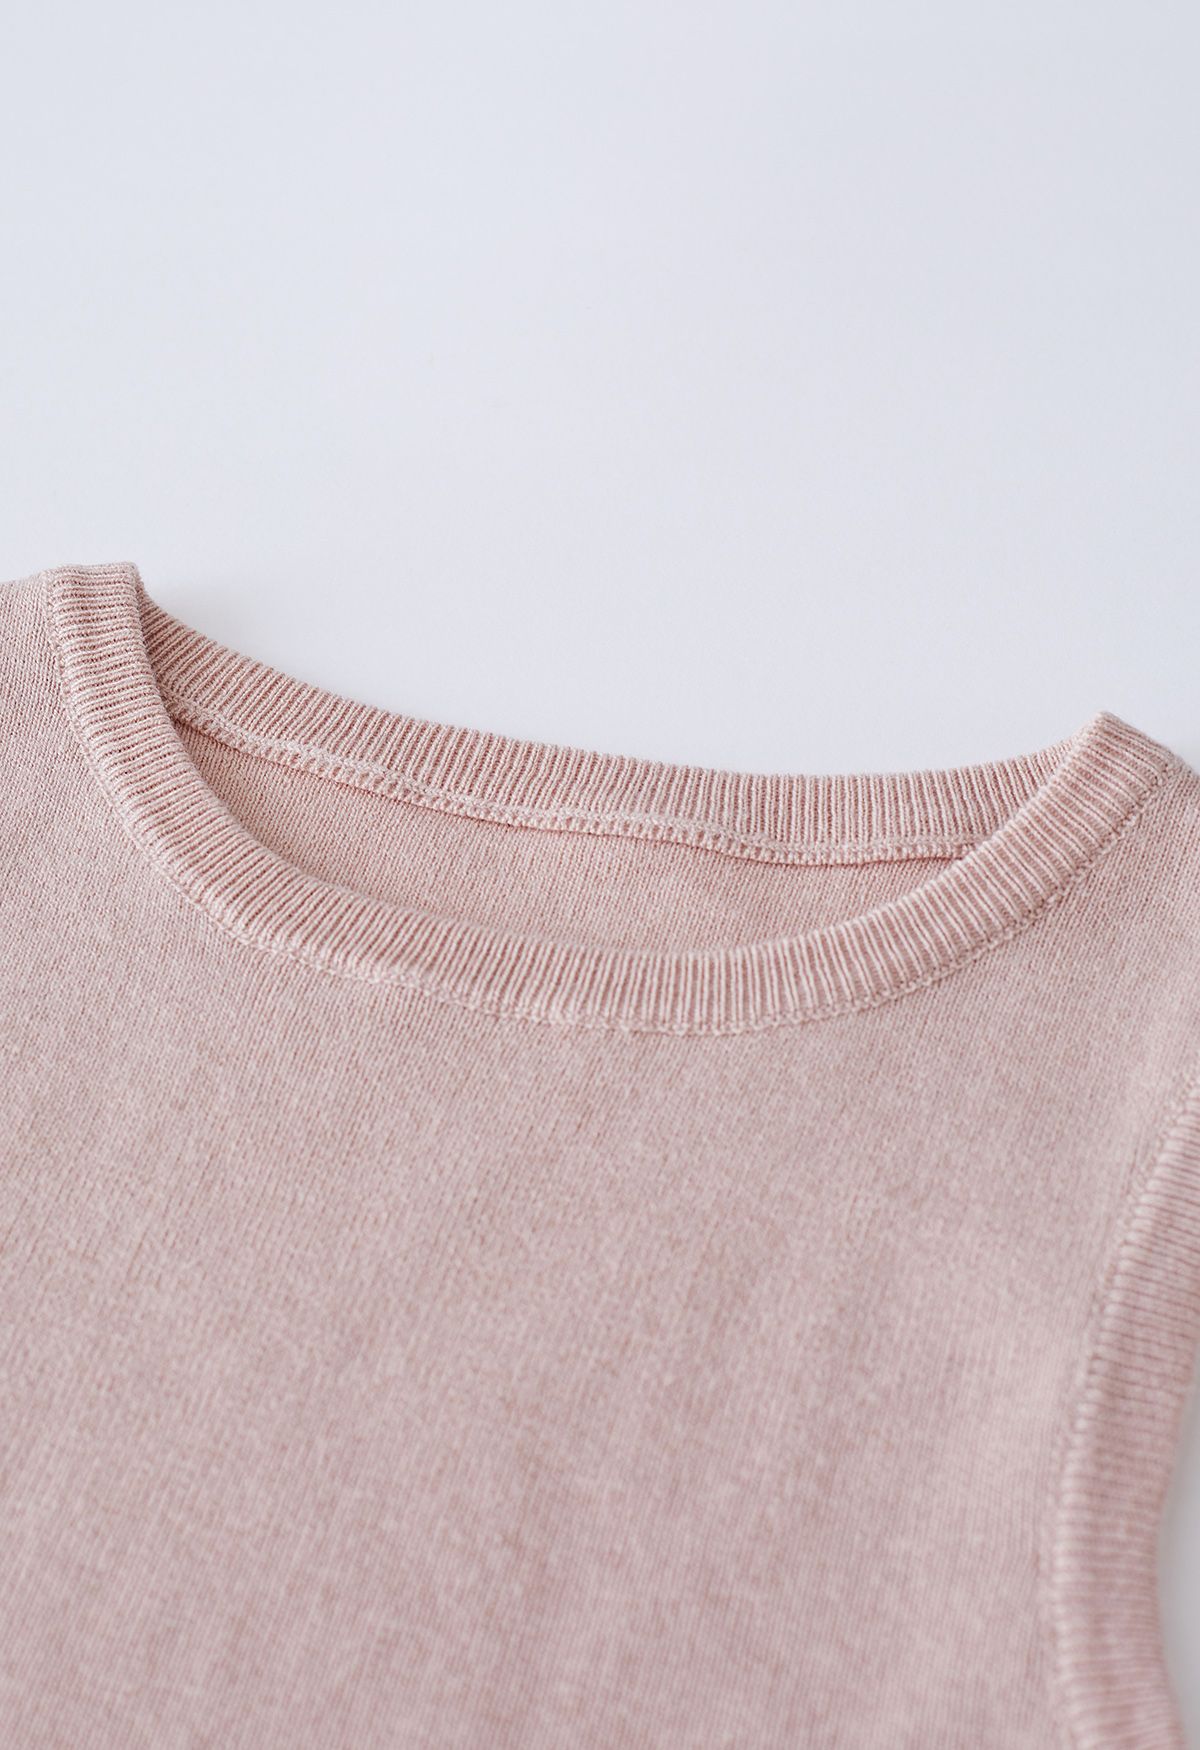 Lithesome Comfort Knit Tank Top in Pink